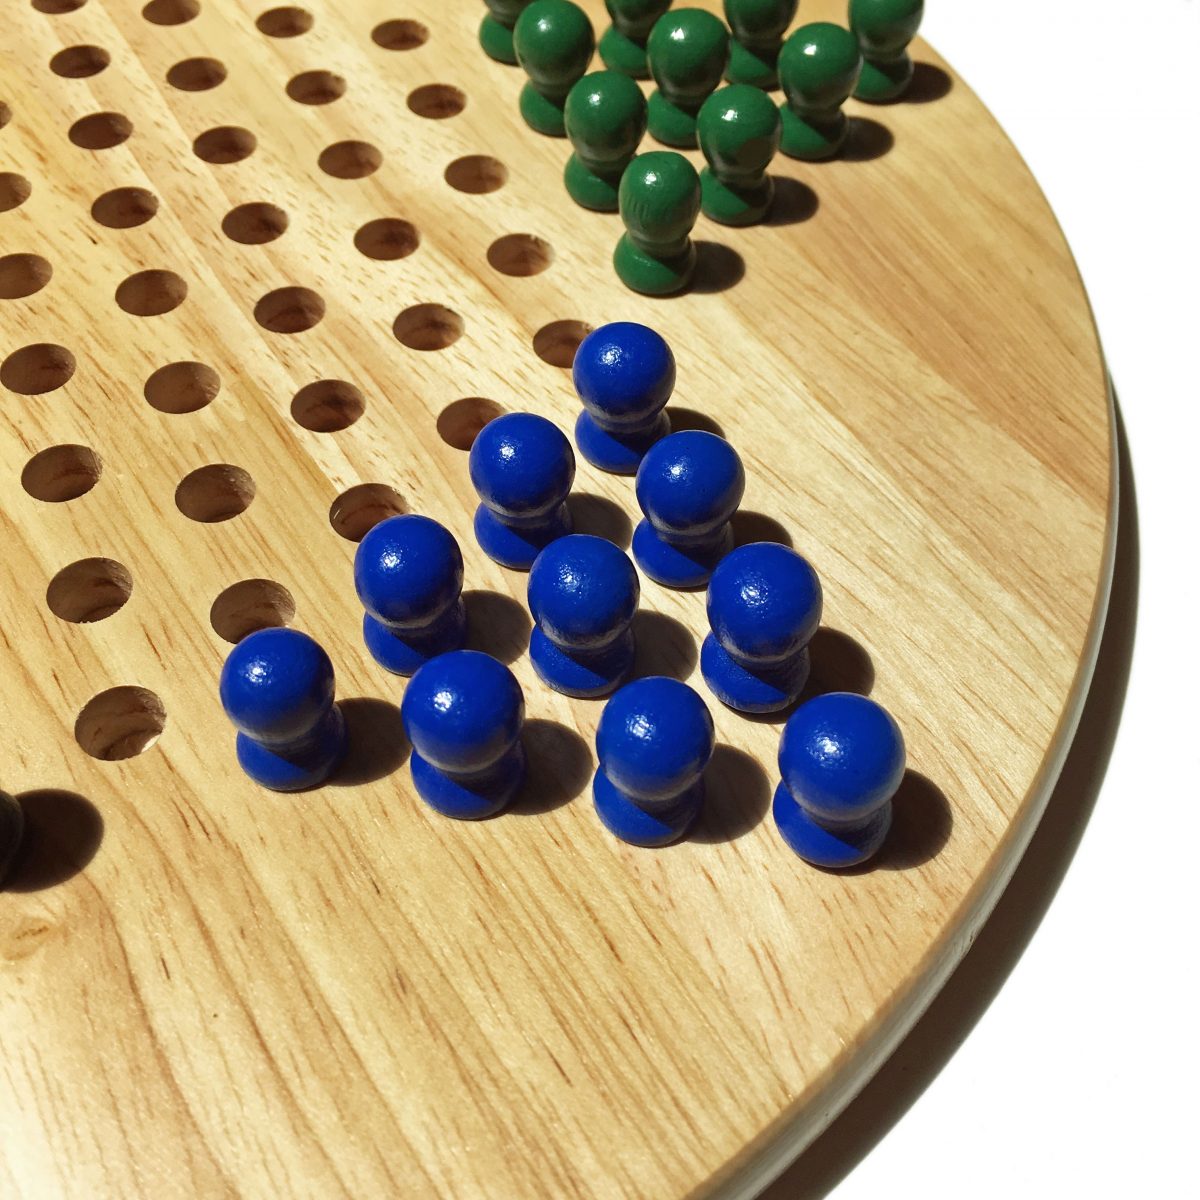 pavilion deluxe chinese checkers game